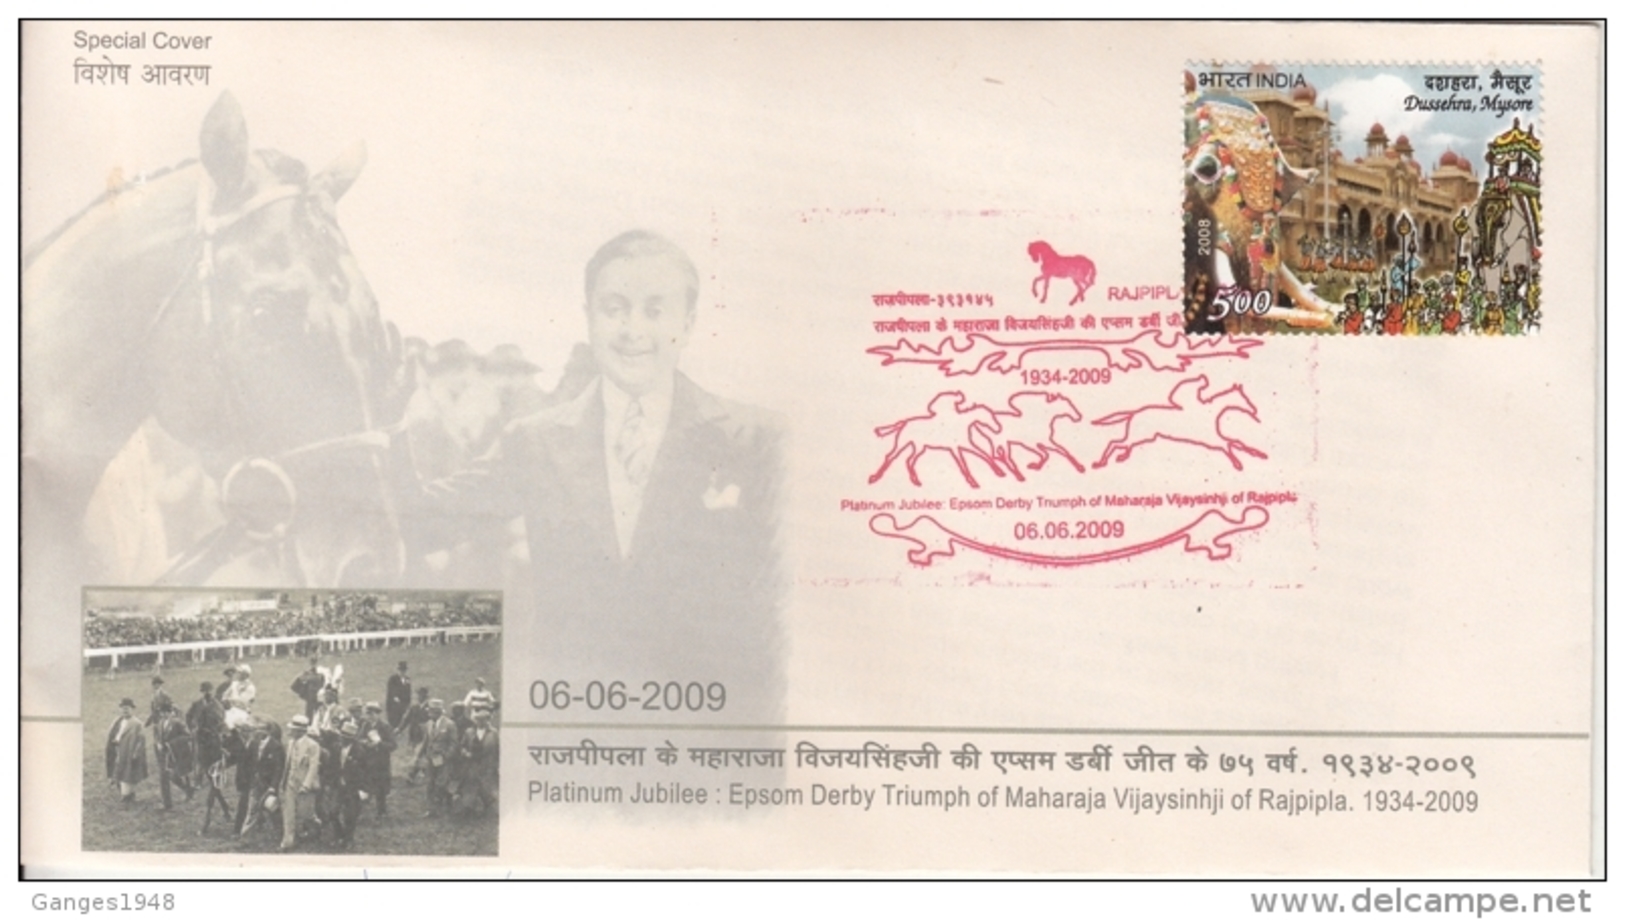 India  2009  Horses Sports  EPSOM DERBY HORSE RACE  Trimph By Maharaja Rajpipla  Special Cover   # 95382  Inde Indien - Horses